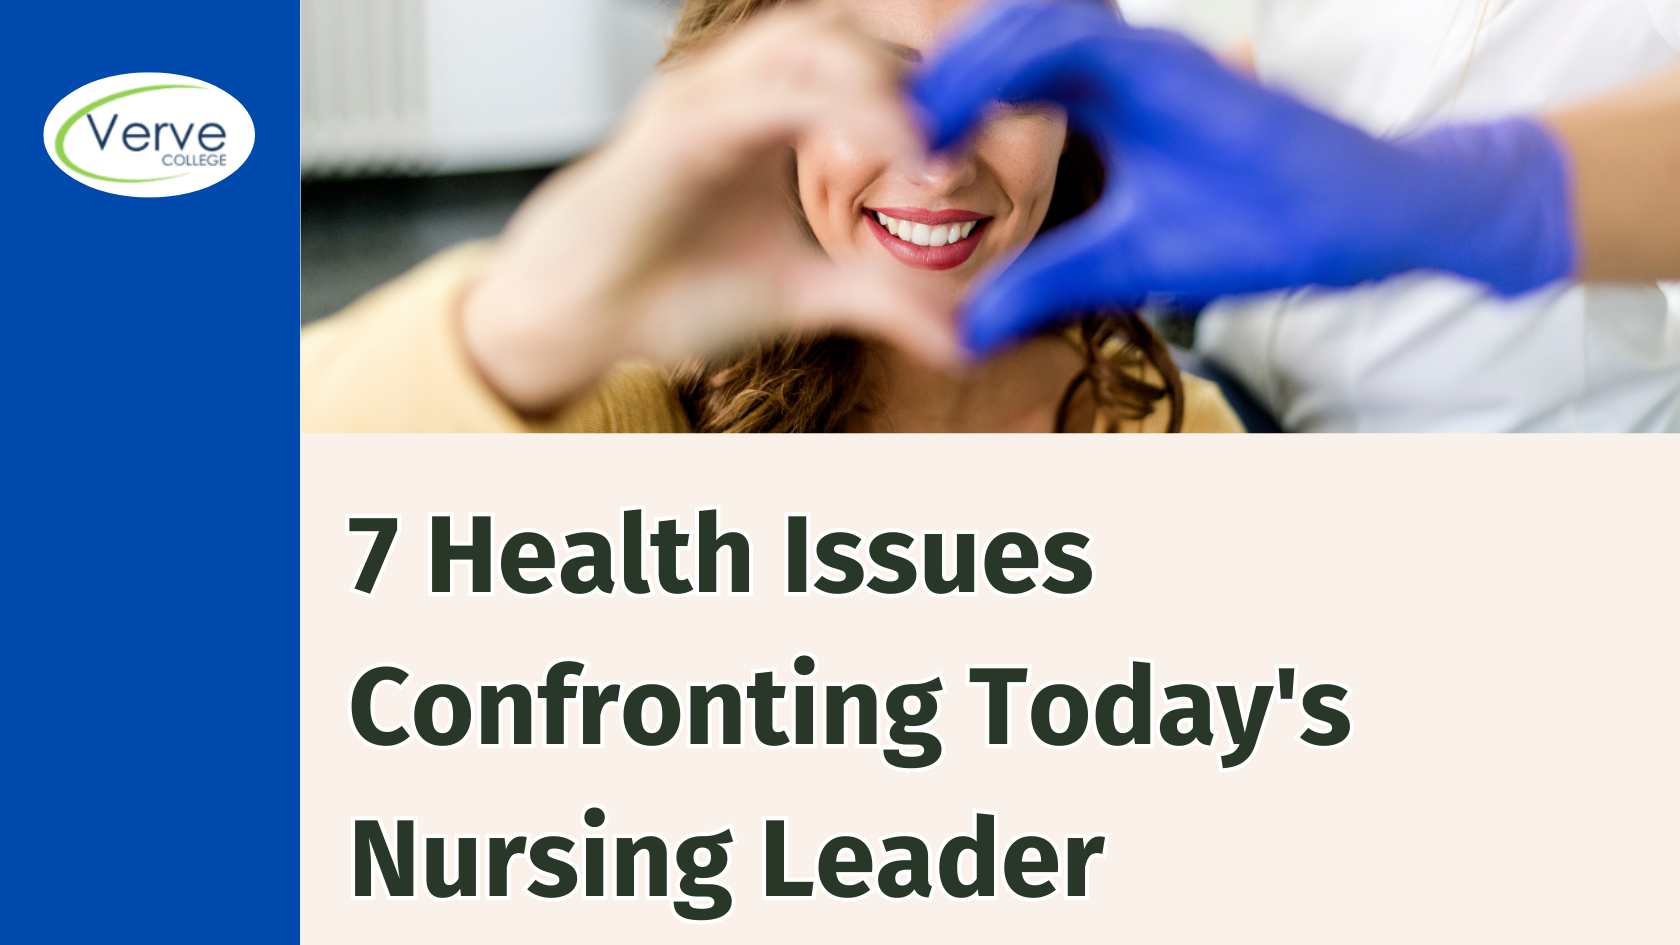 7 Health Issues Confronting Today’s Nursing Leader